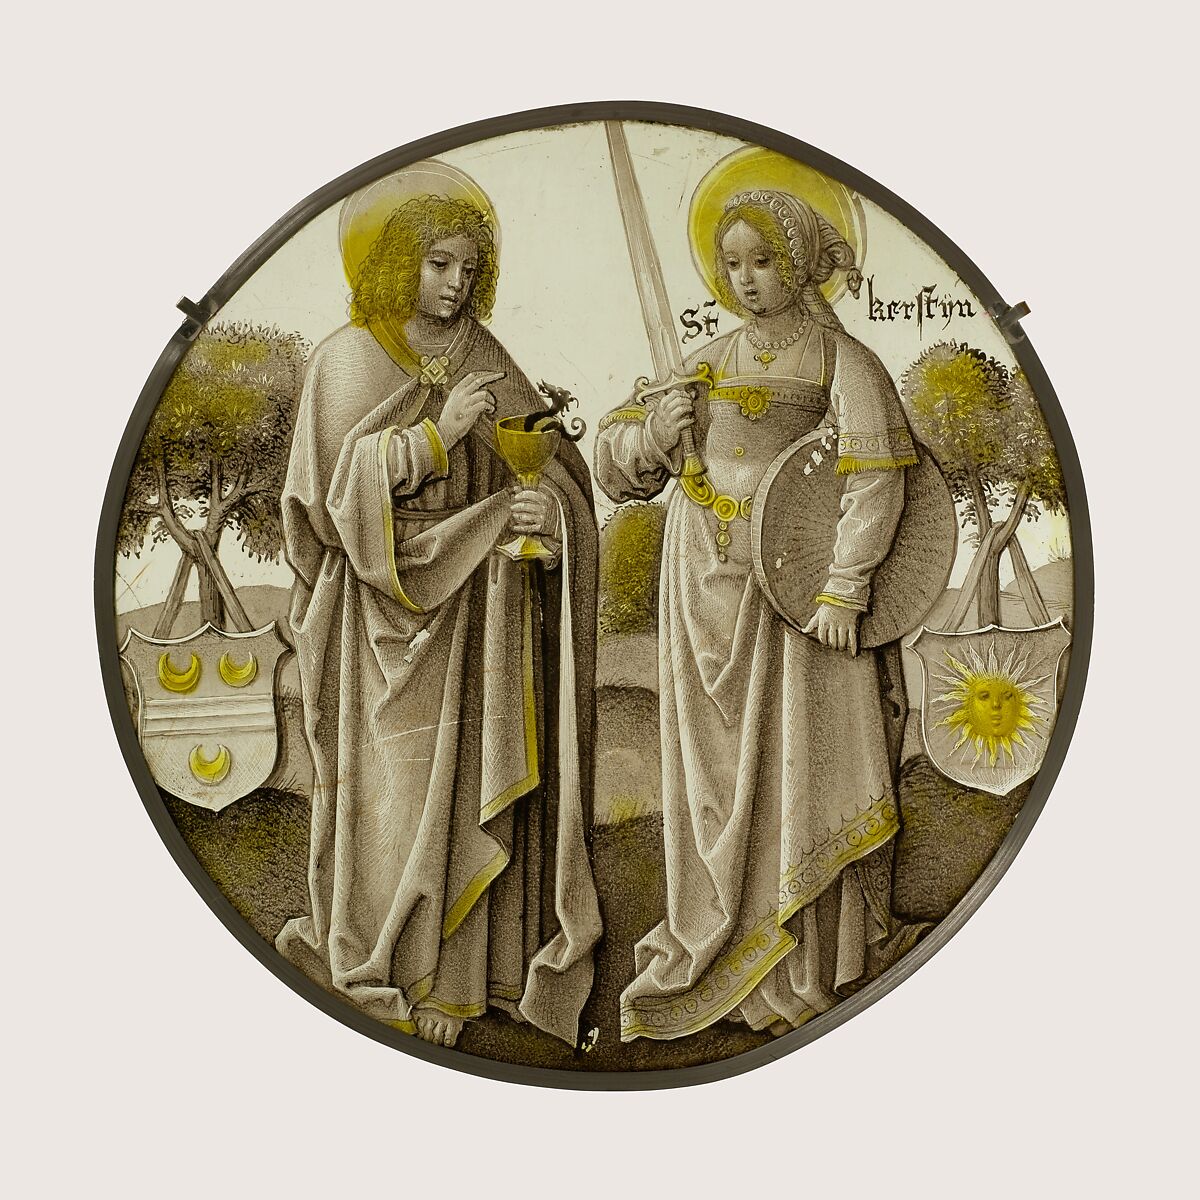 Heraldic Roundel with Saints John the Evangelist and Christina, colorless glass, silver stain, and vitreous paint, South Netherlandish